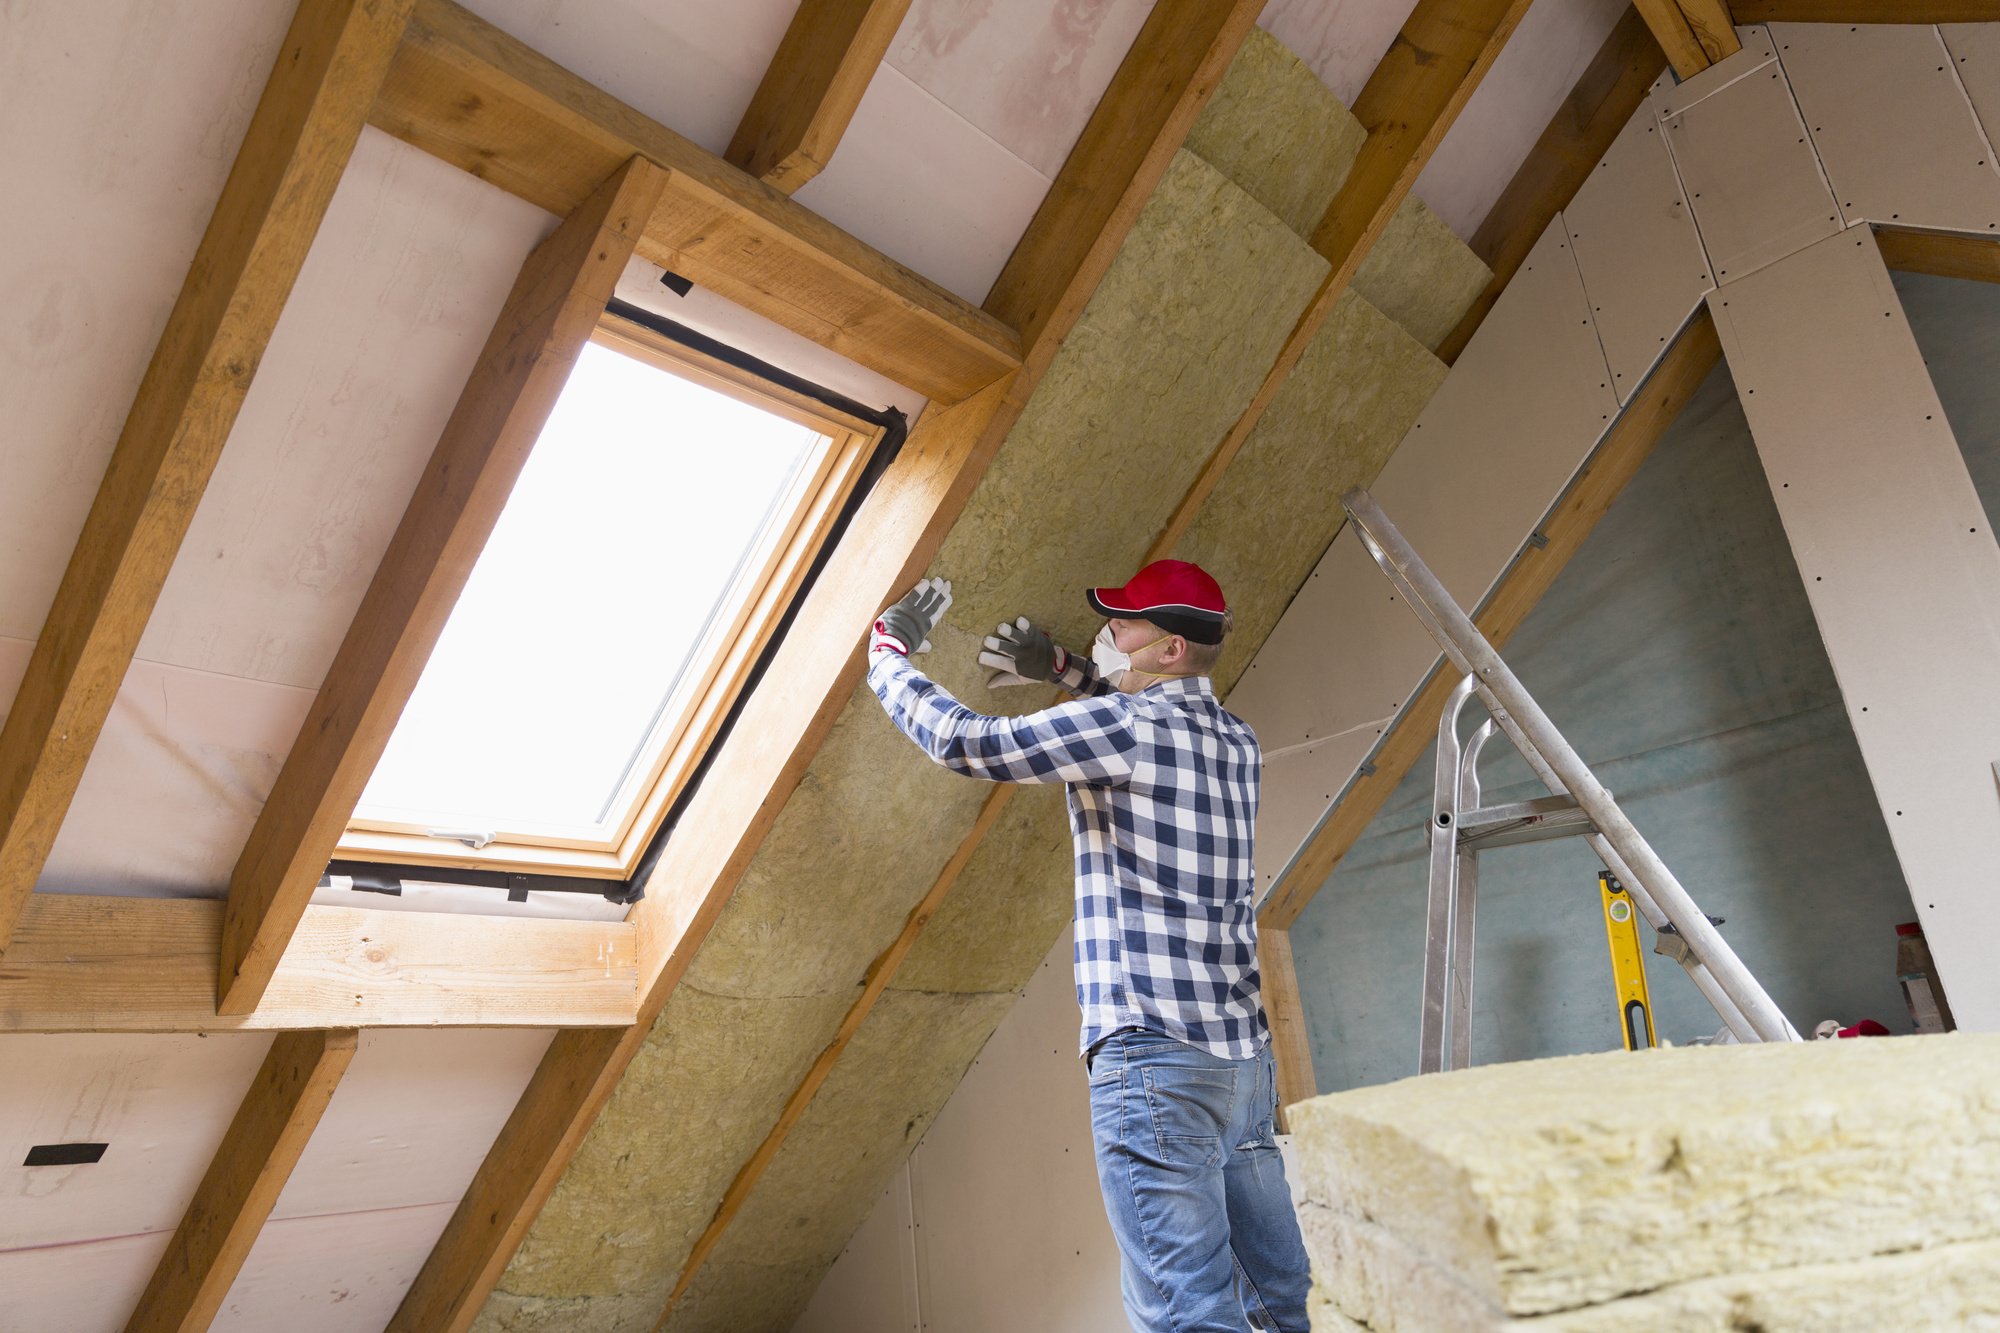 Do you need to insulate your attic this year? This article will explain the pros and cons of different types of attic insulation!